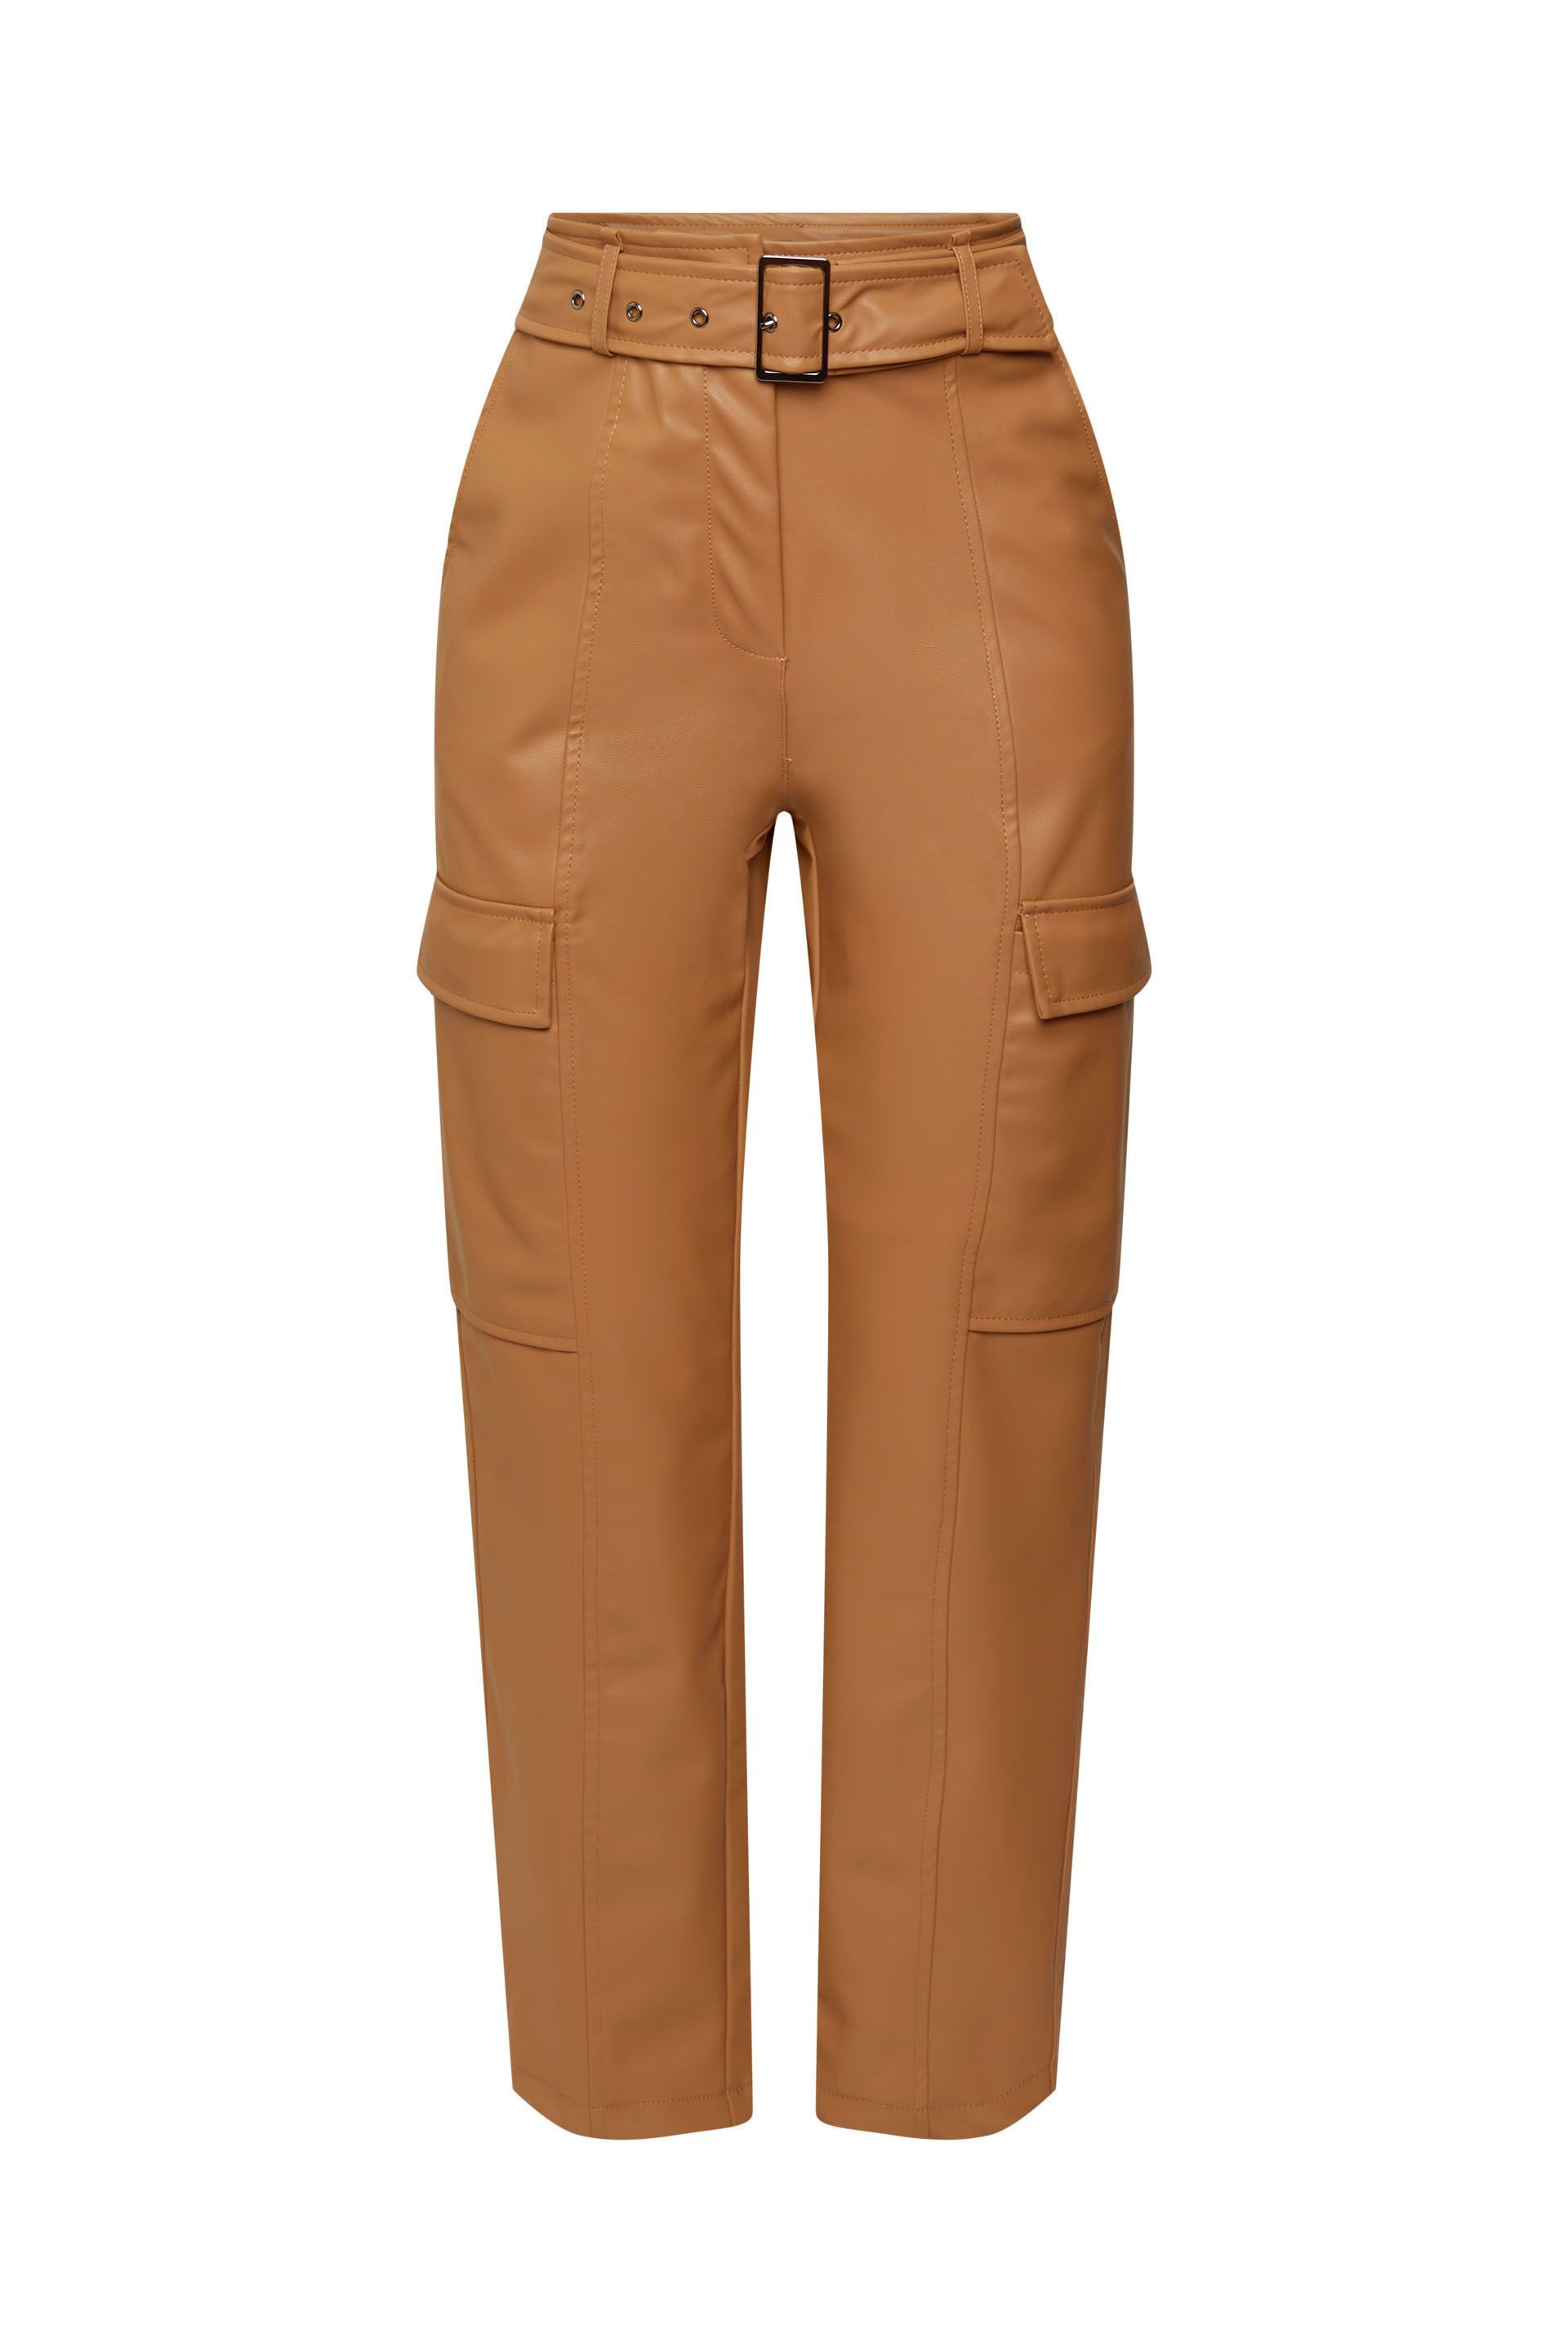 Faux leather trousers with belt, Light Brown, large image number 0